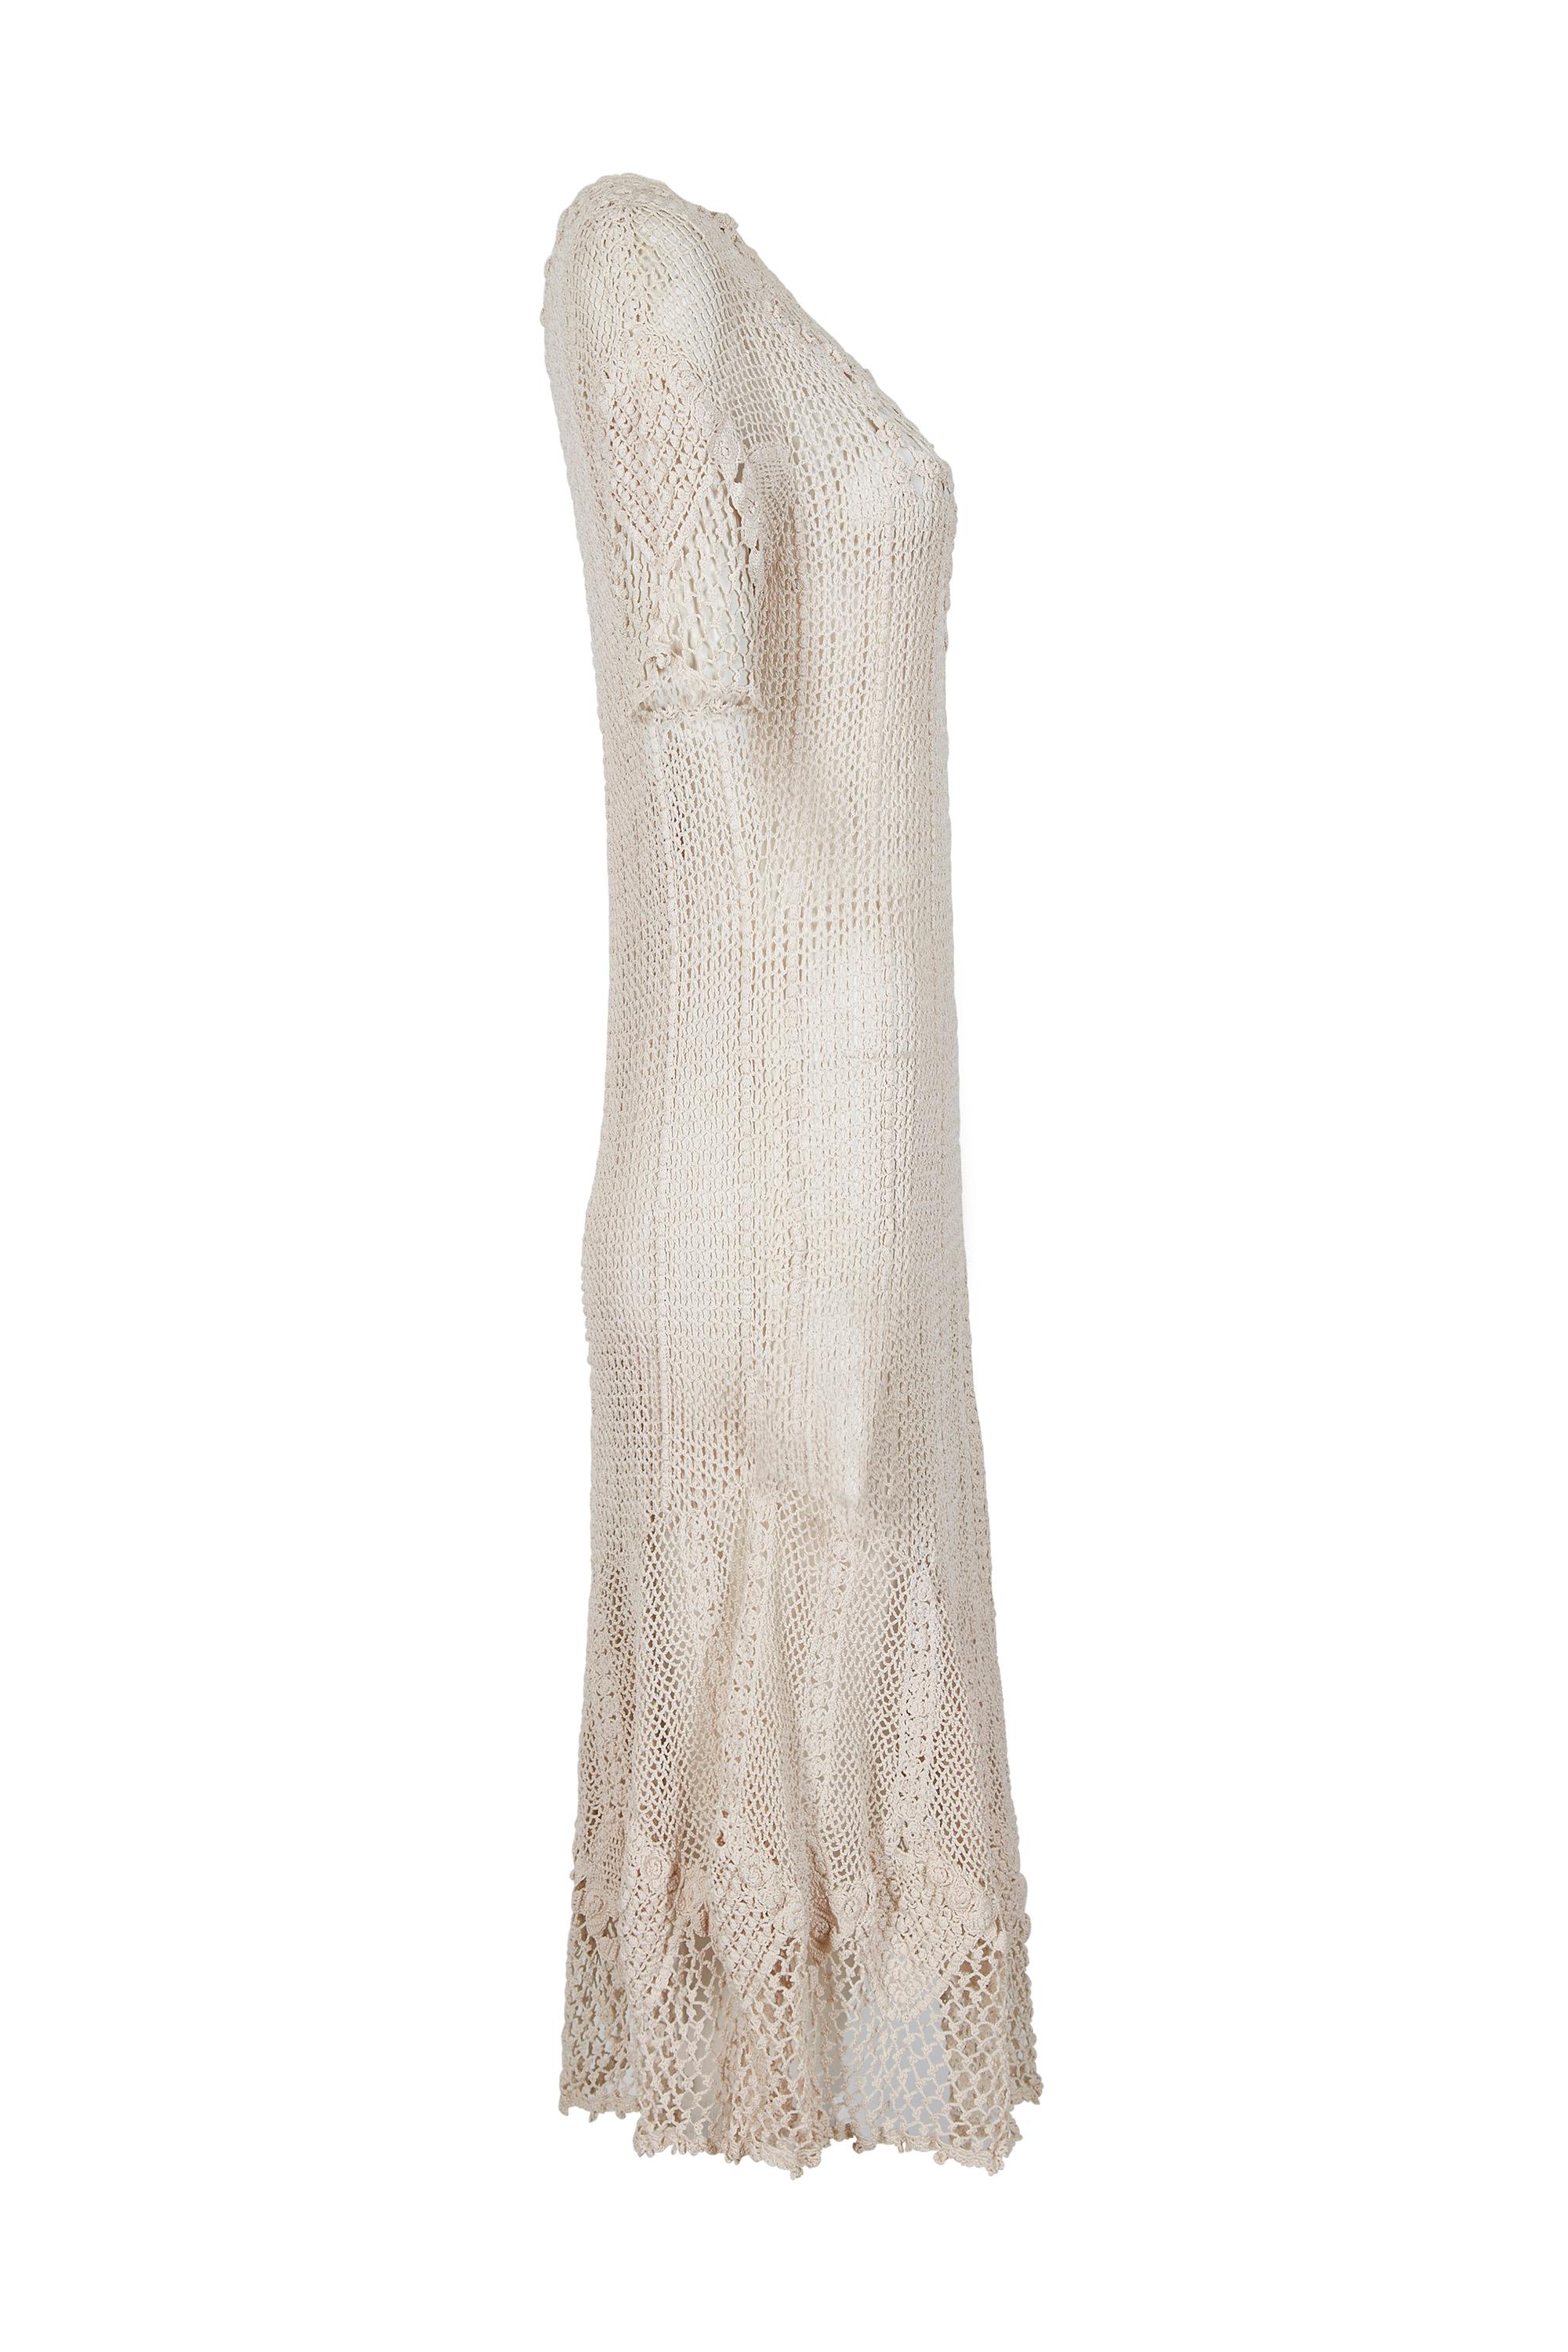 This exquisite, original 1930s hand crochet dress in ivory cream is likely of US origin and made in the Irish tradition.  It is therefore unlabelled.  It would make an enchanting choice for vintage bridal wear. The dress is ankle length with a